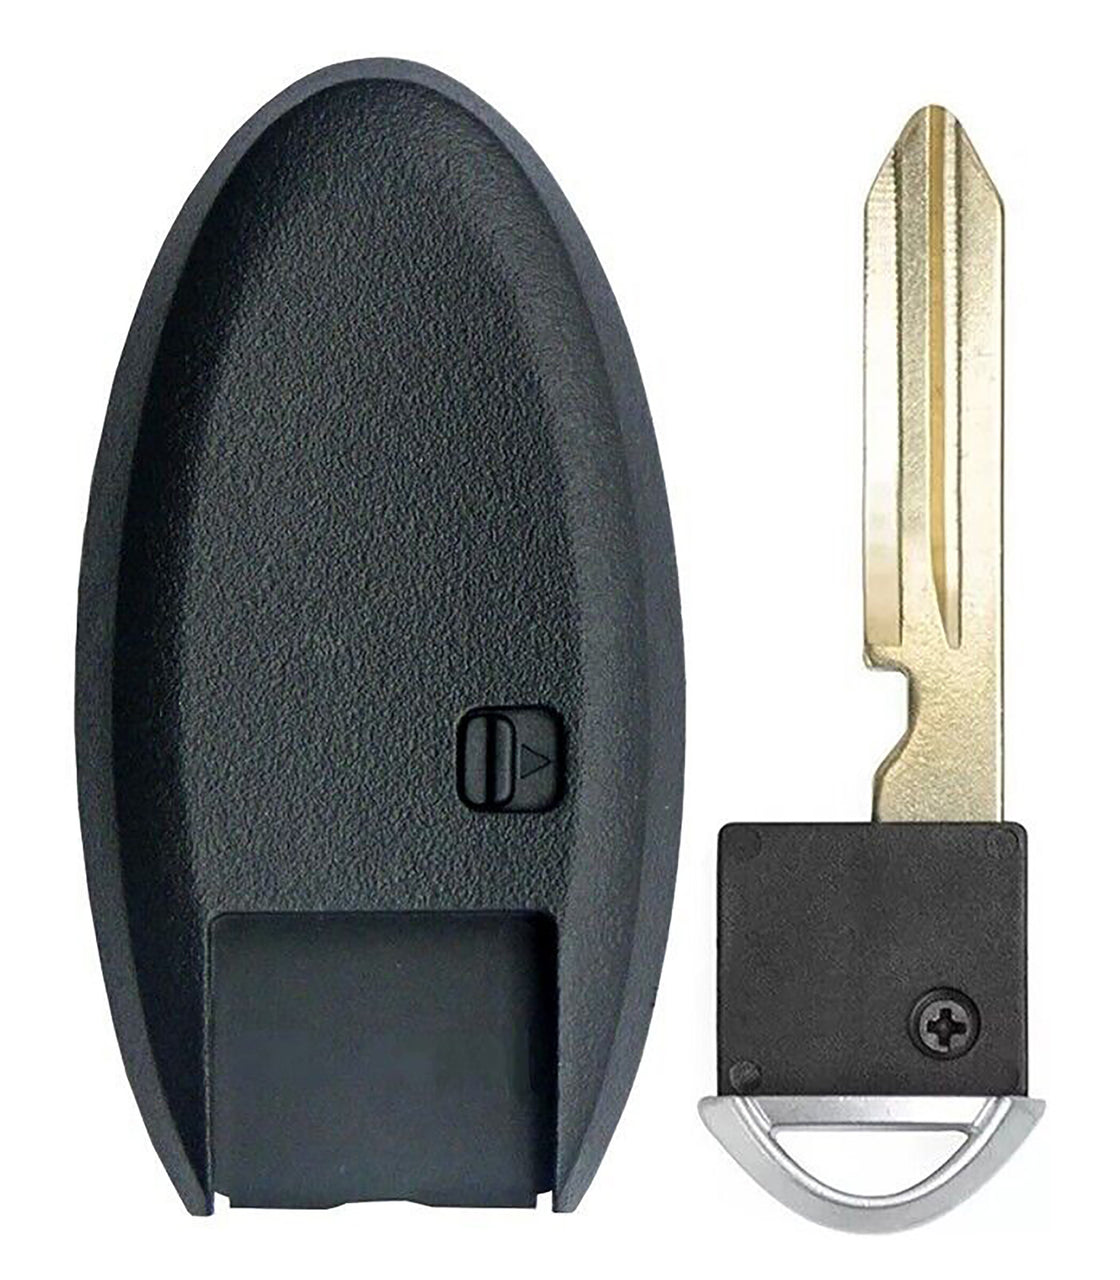 1x New Replacement Proximity Key Fob Compatible with & Fit For Nissan Vehicles (Check Fitment) - MPN KR5TXN7-08